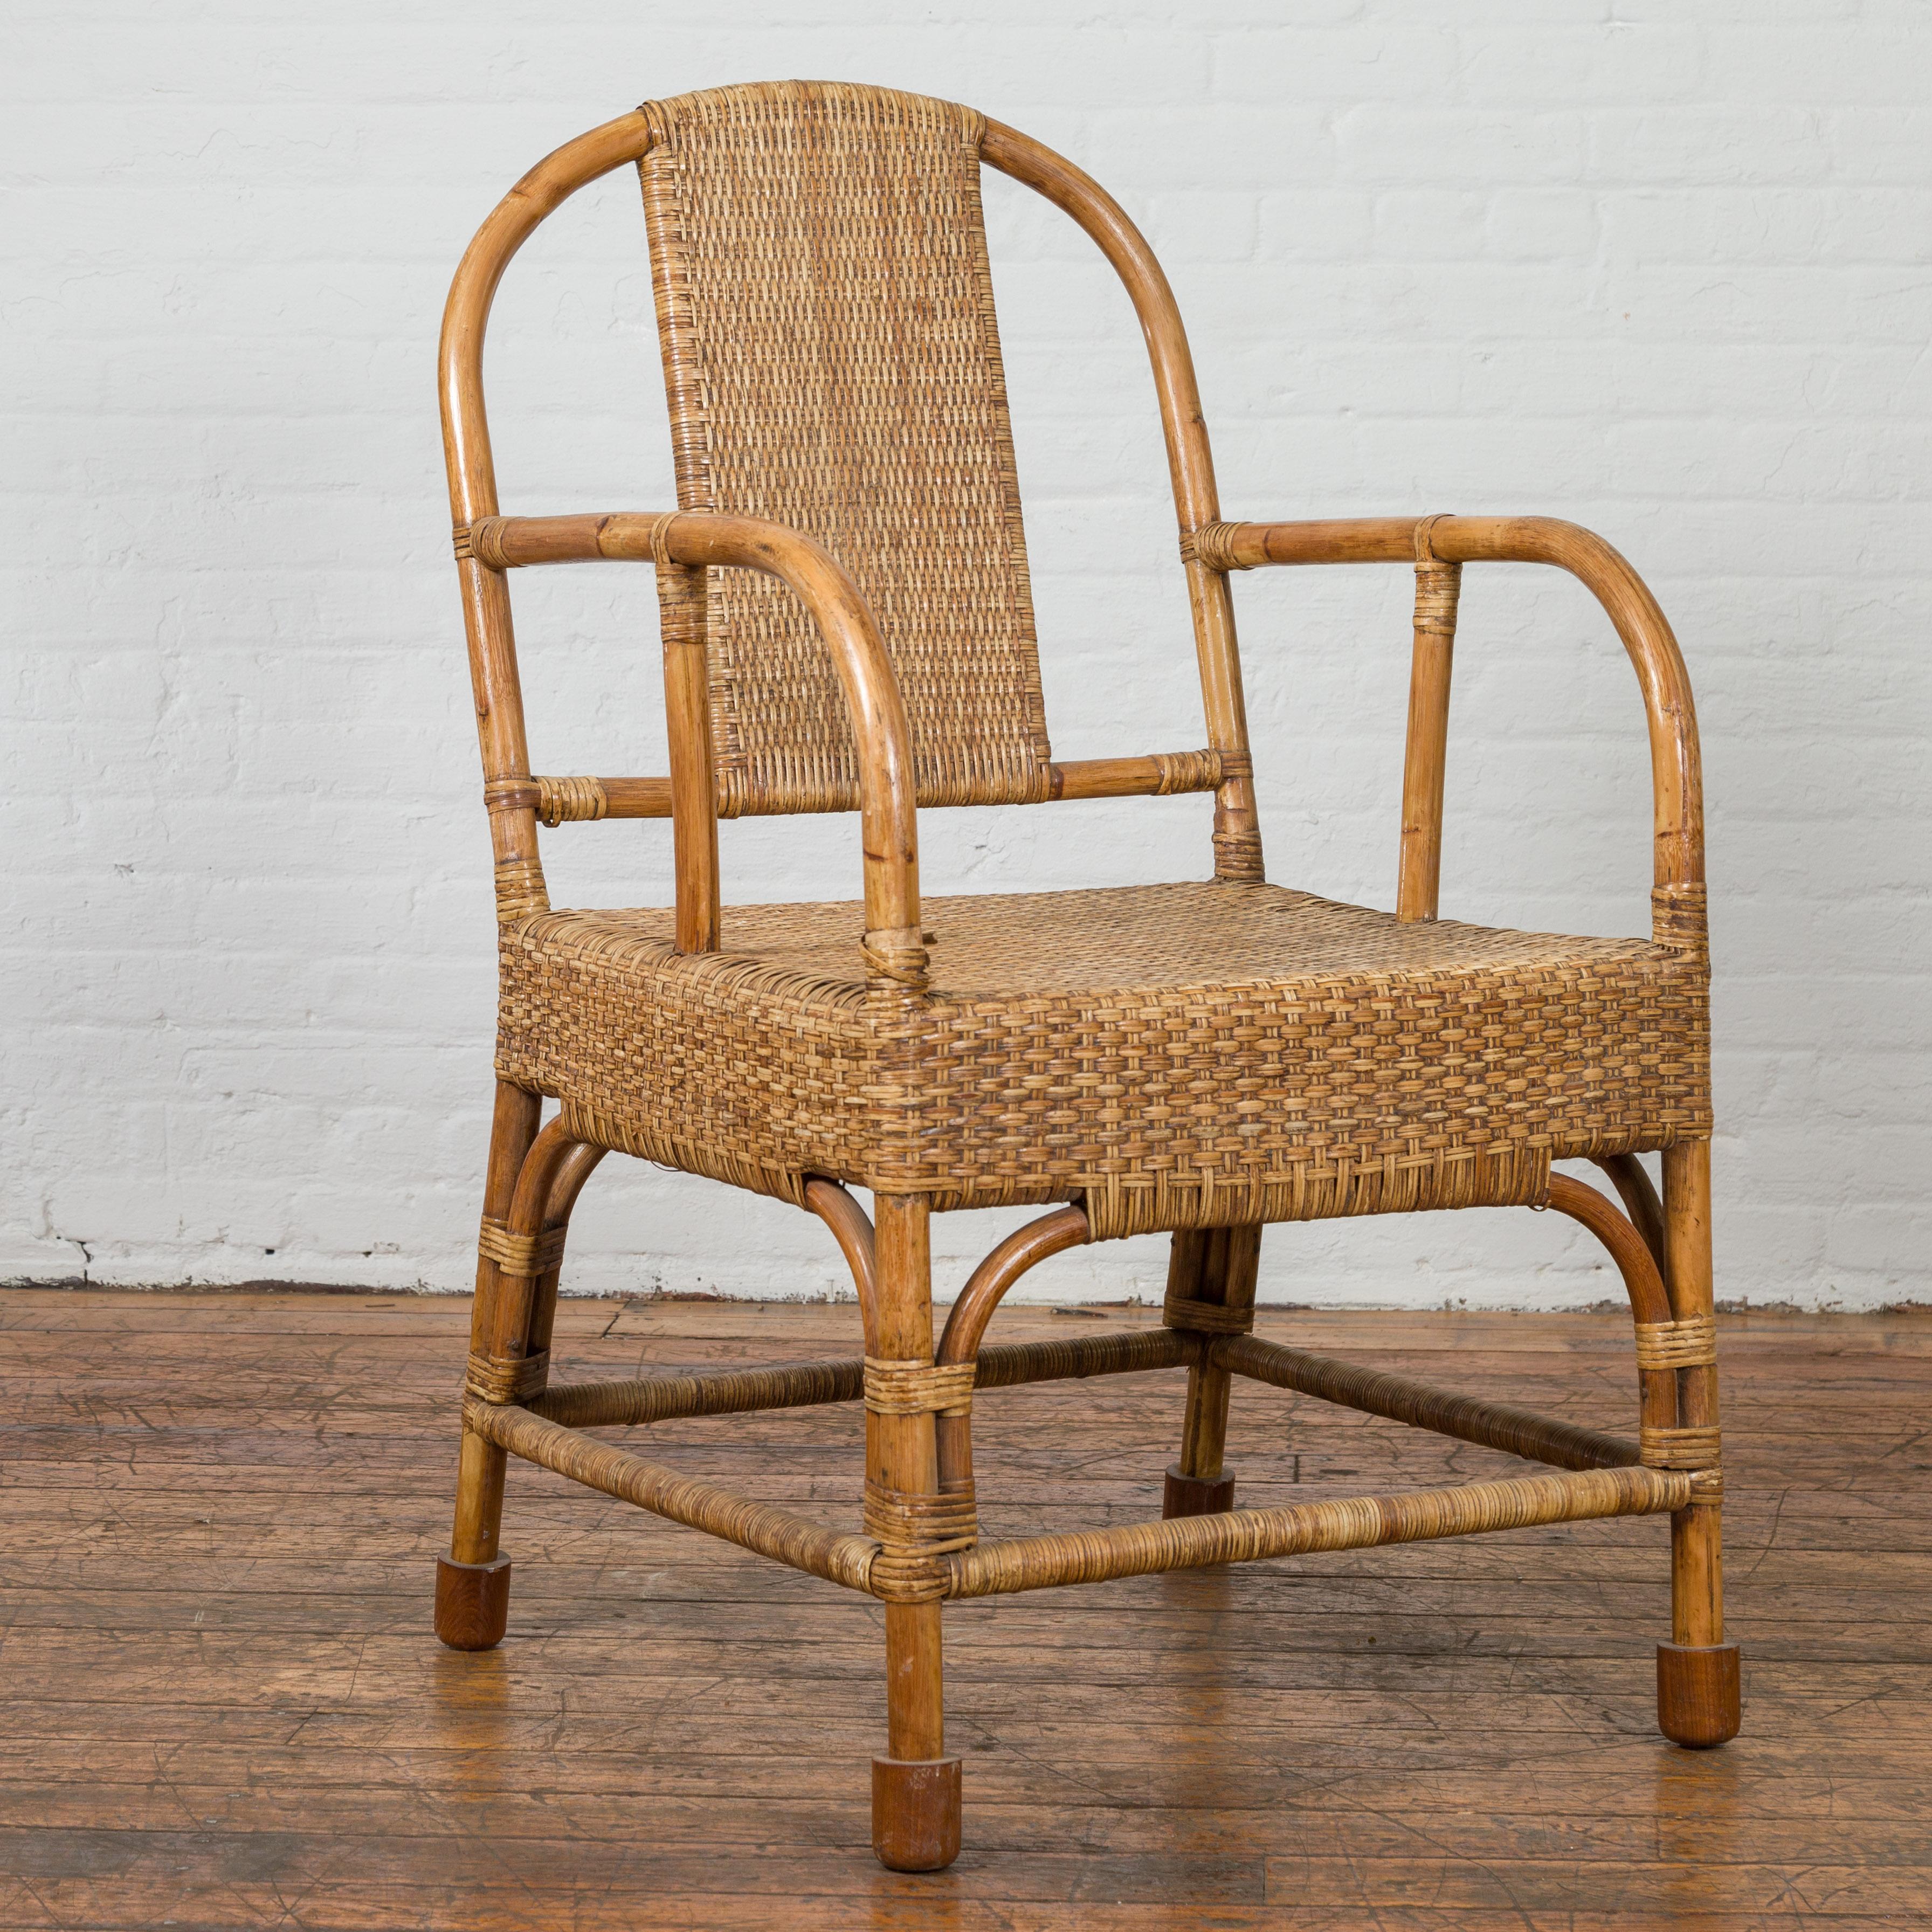 A vintage Burmese country style hand woven rattan armchair from the mid-20th century, with rounded open back, looping arms and side stretchers. We currently have several chairs available, priced and sold individually. Created in Burma during the